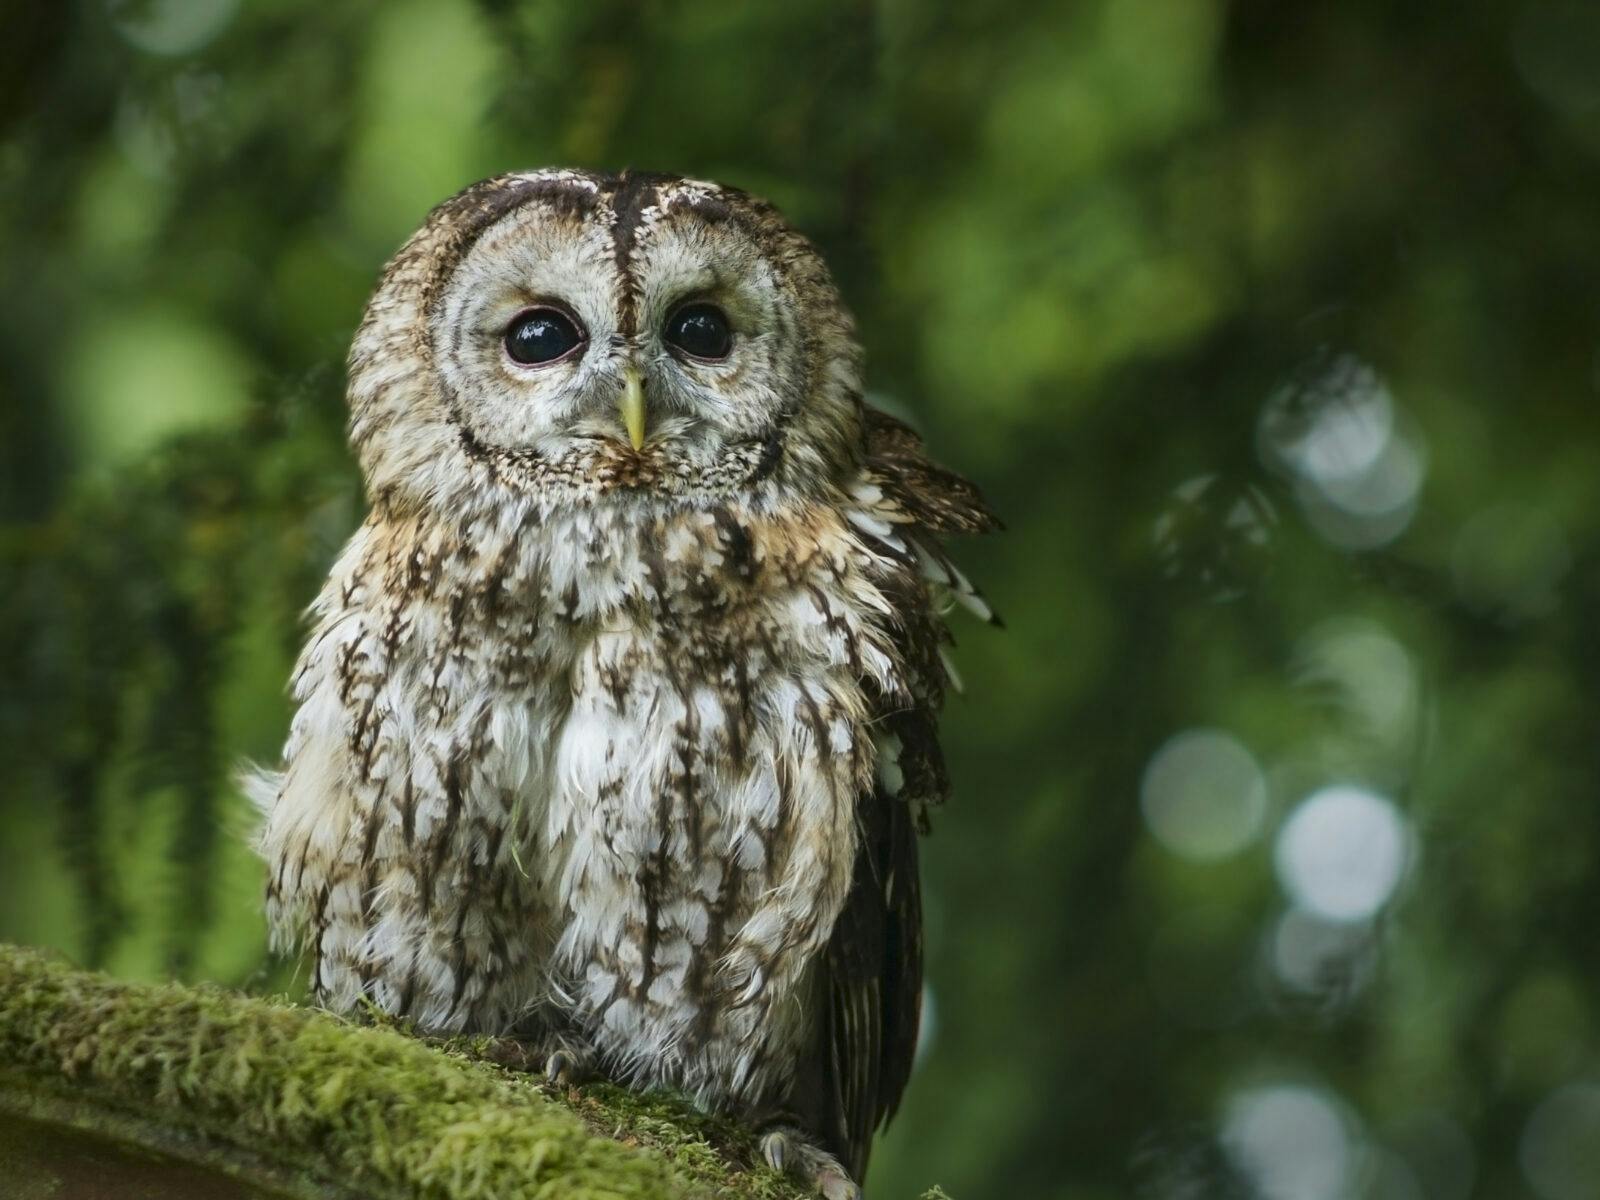 Young tawny owl sitting on moss outdoors. Green bokeh background.